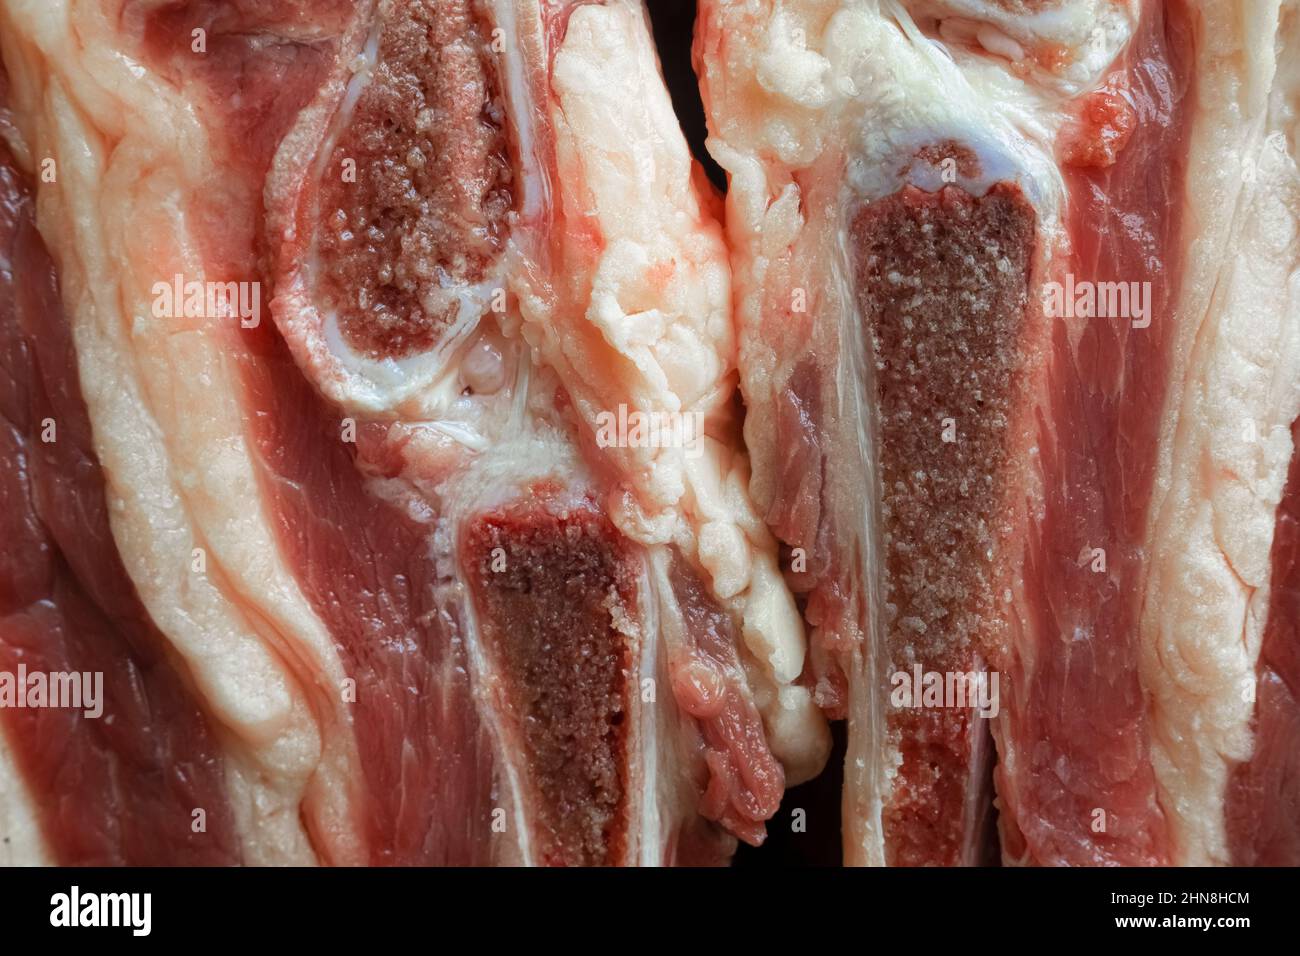 Fat pieces of beef meat with bones and cartilage close-up Stock Photo